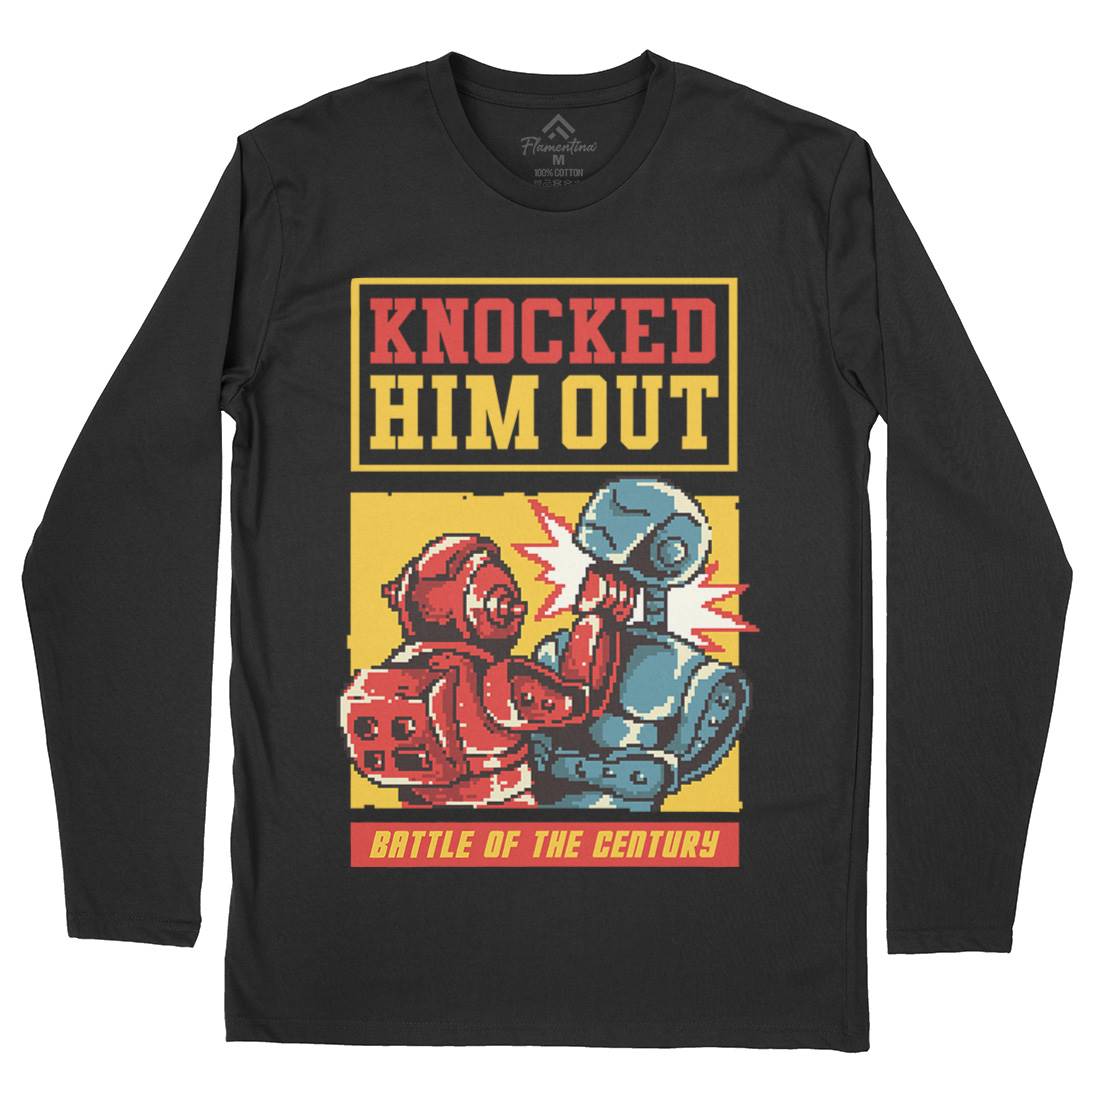 Knocked Him Out Mens Long Sleeve T-Shirt Space B923